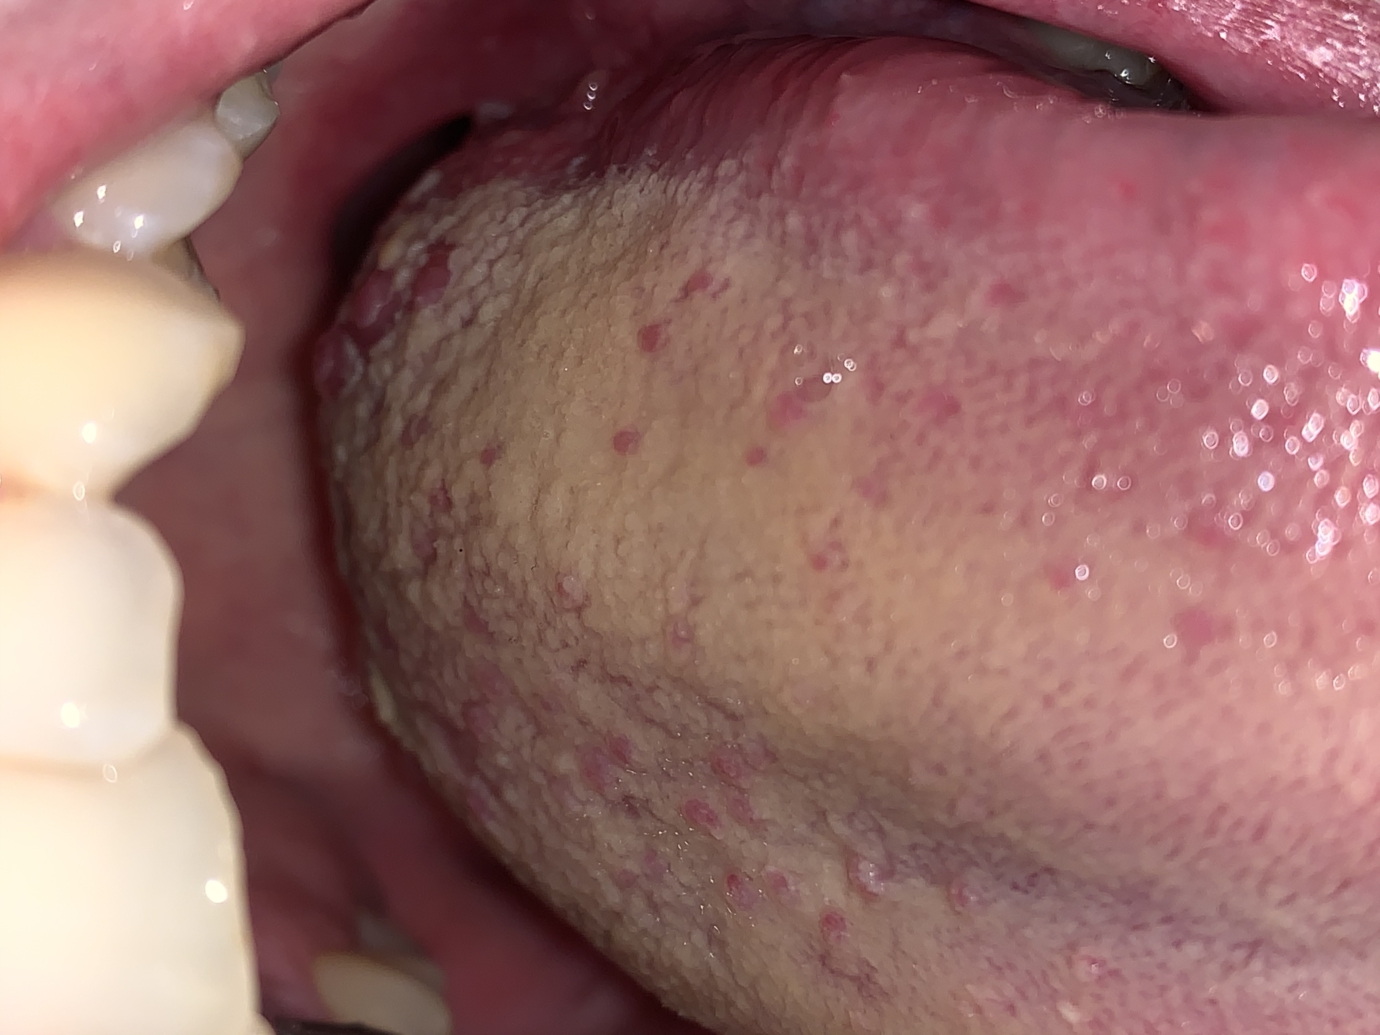 Benign wart on tongue, Wart on the tongue